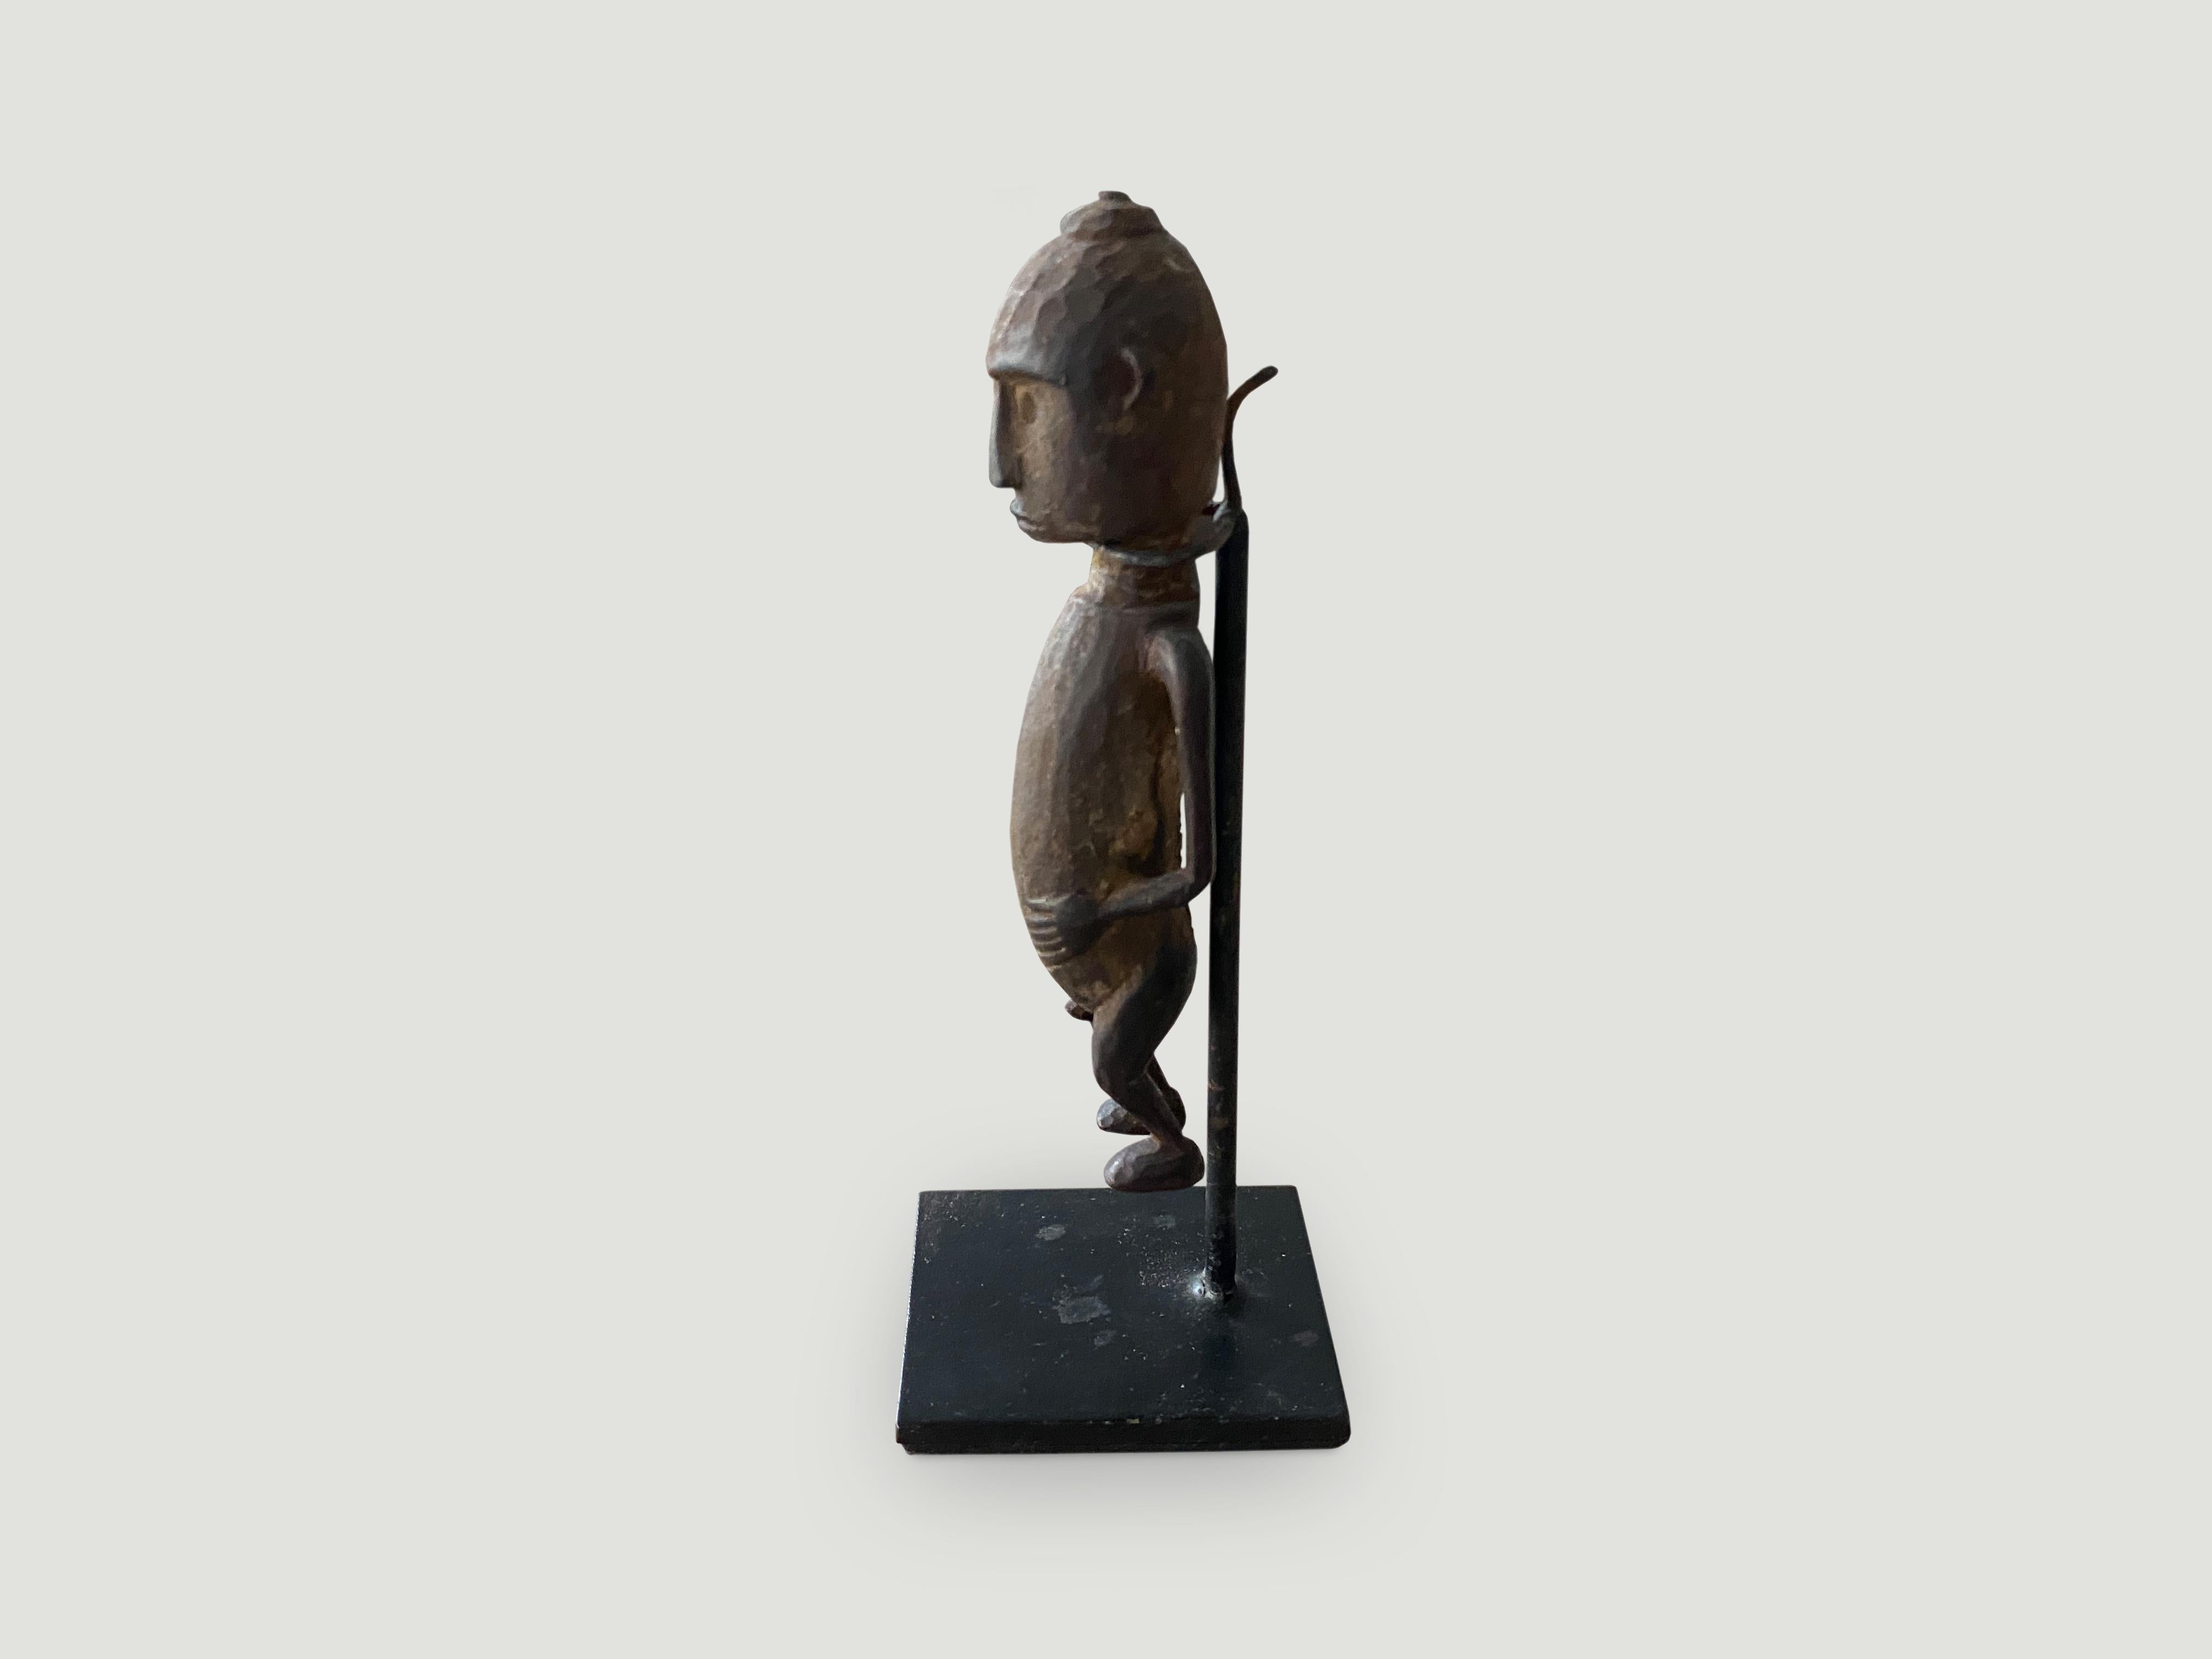 Hand carved wooden figurine of a primitive man from Sumatra. Set on a modern black metal stand, circa 1950

This figurine was sourced in the spirit of wabi-sabi, a Japanese philosophy that beauty can be found in imperfection and impermanence. It